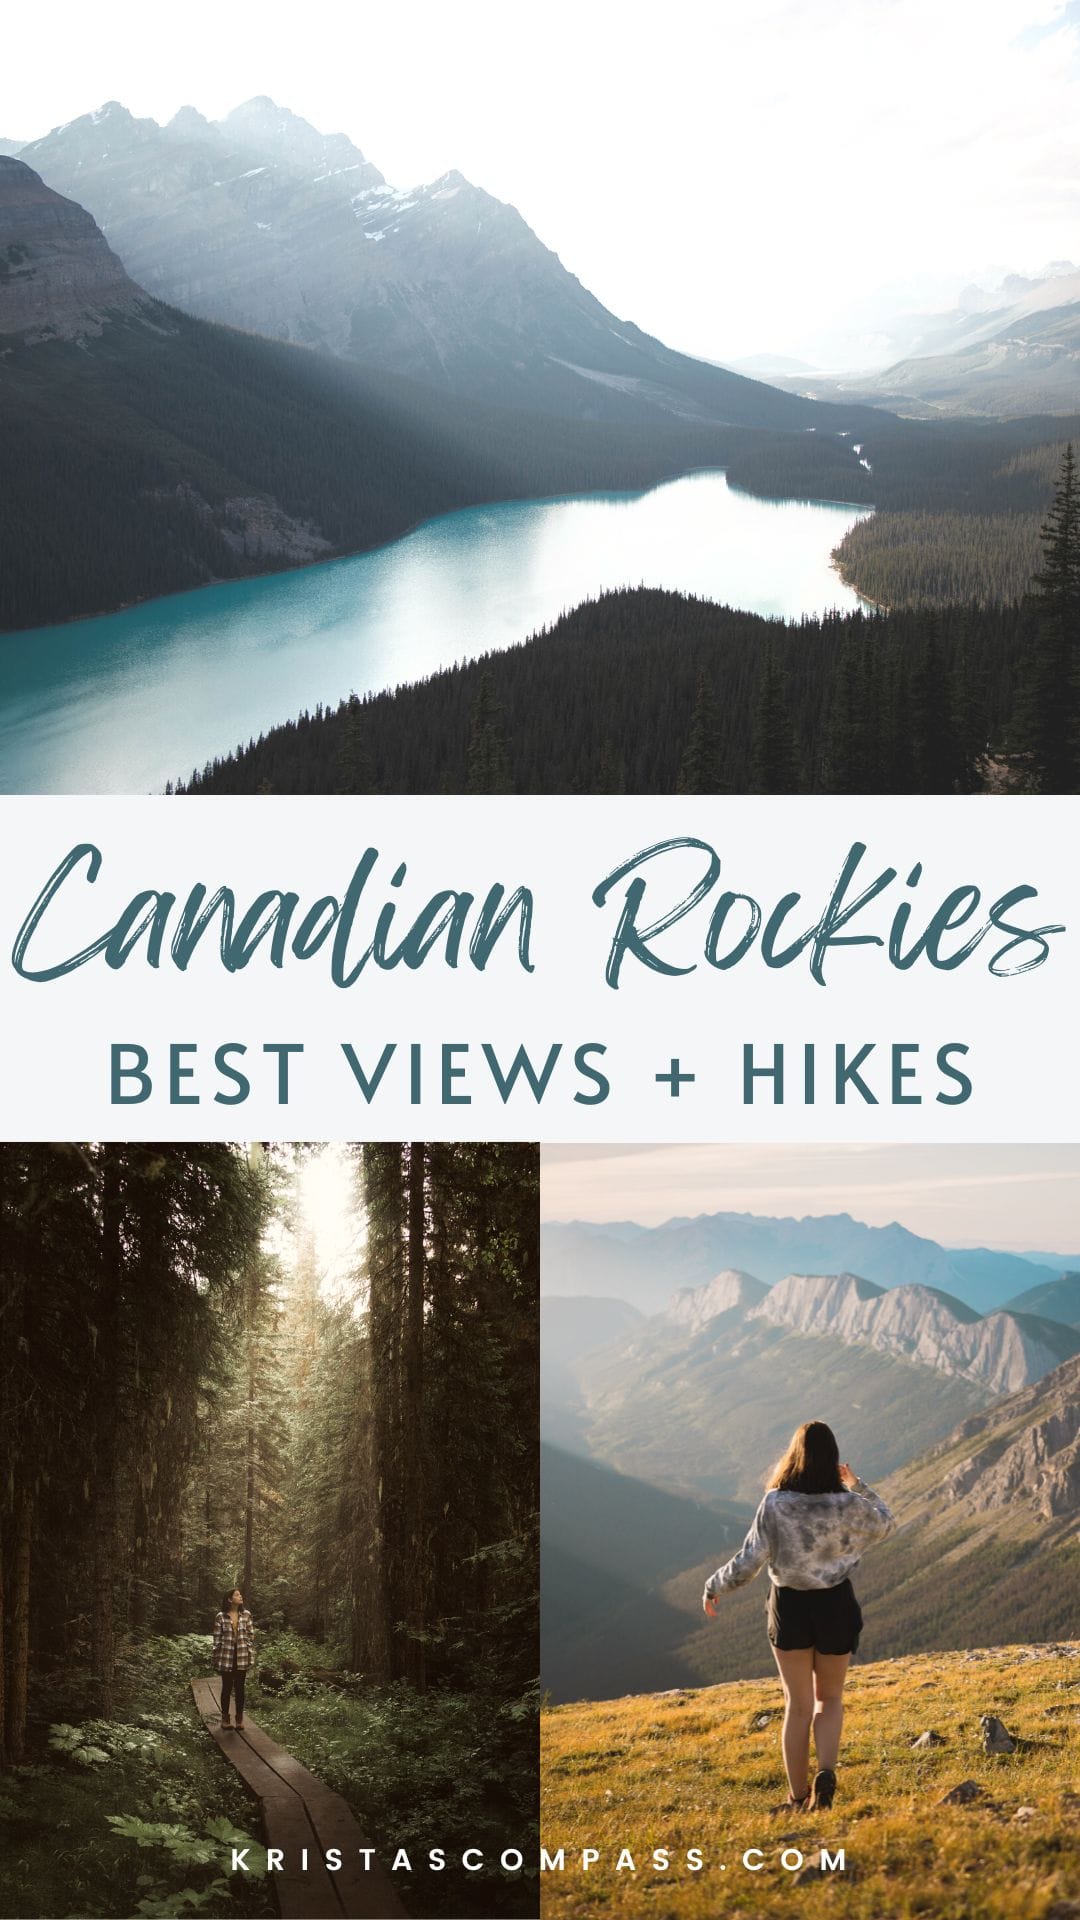 best hikes in the canadian rockies you need to add to your canadian rockies bucket list hikes pinterest pin